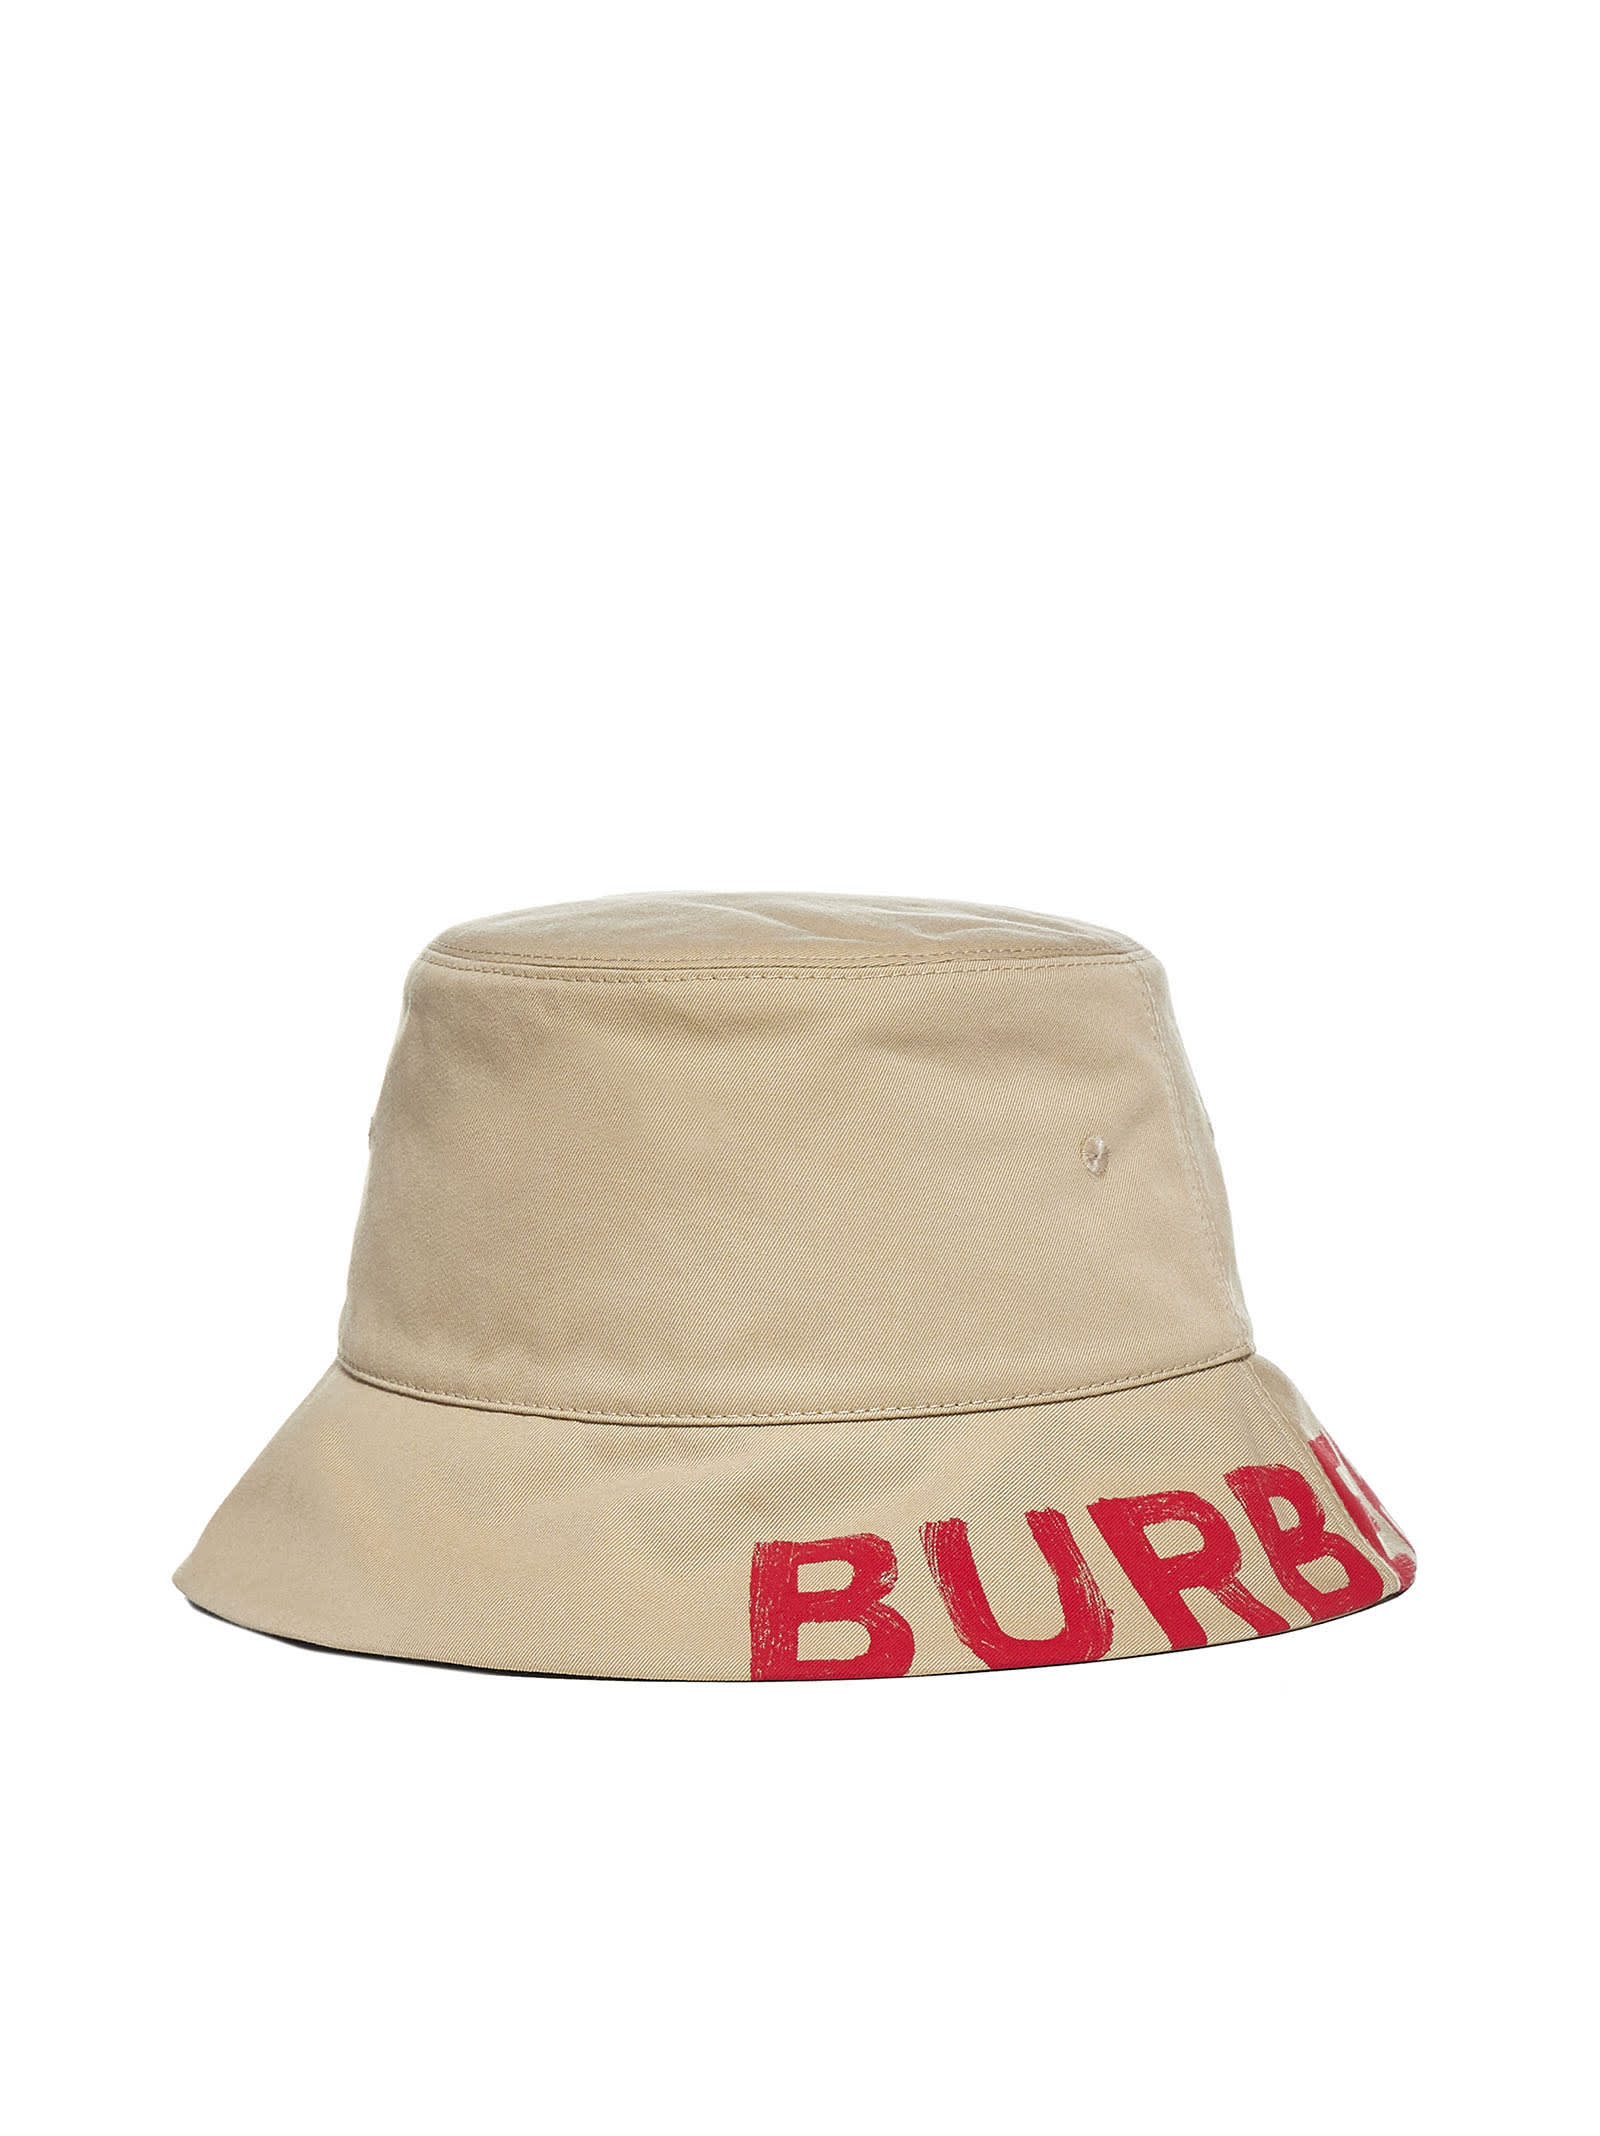 BURBERRY HAT,8037598 -A1366